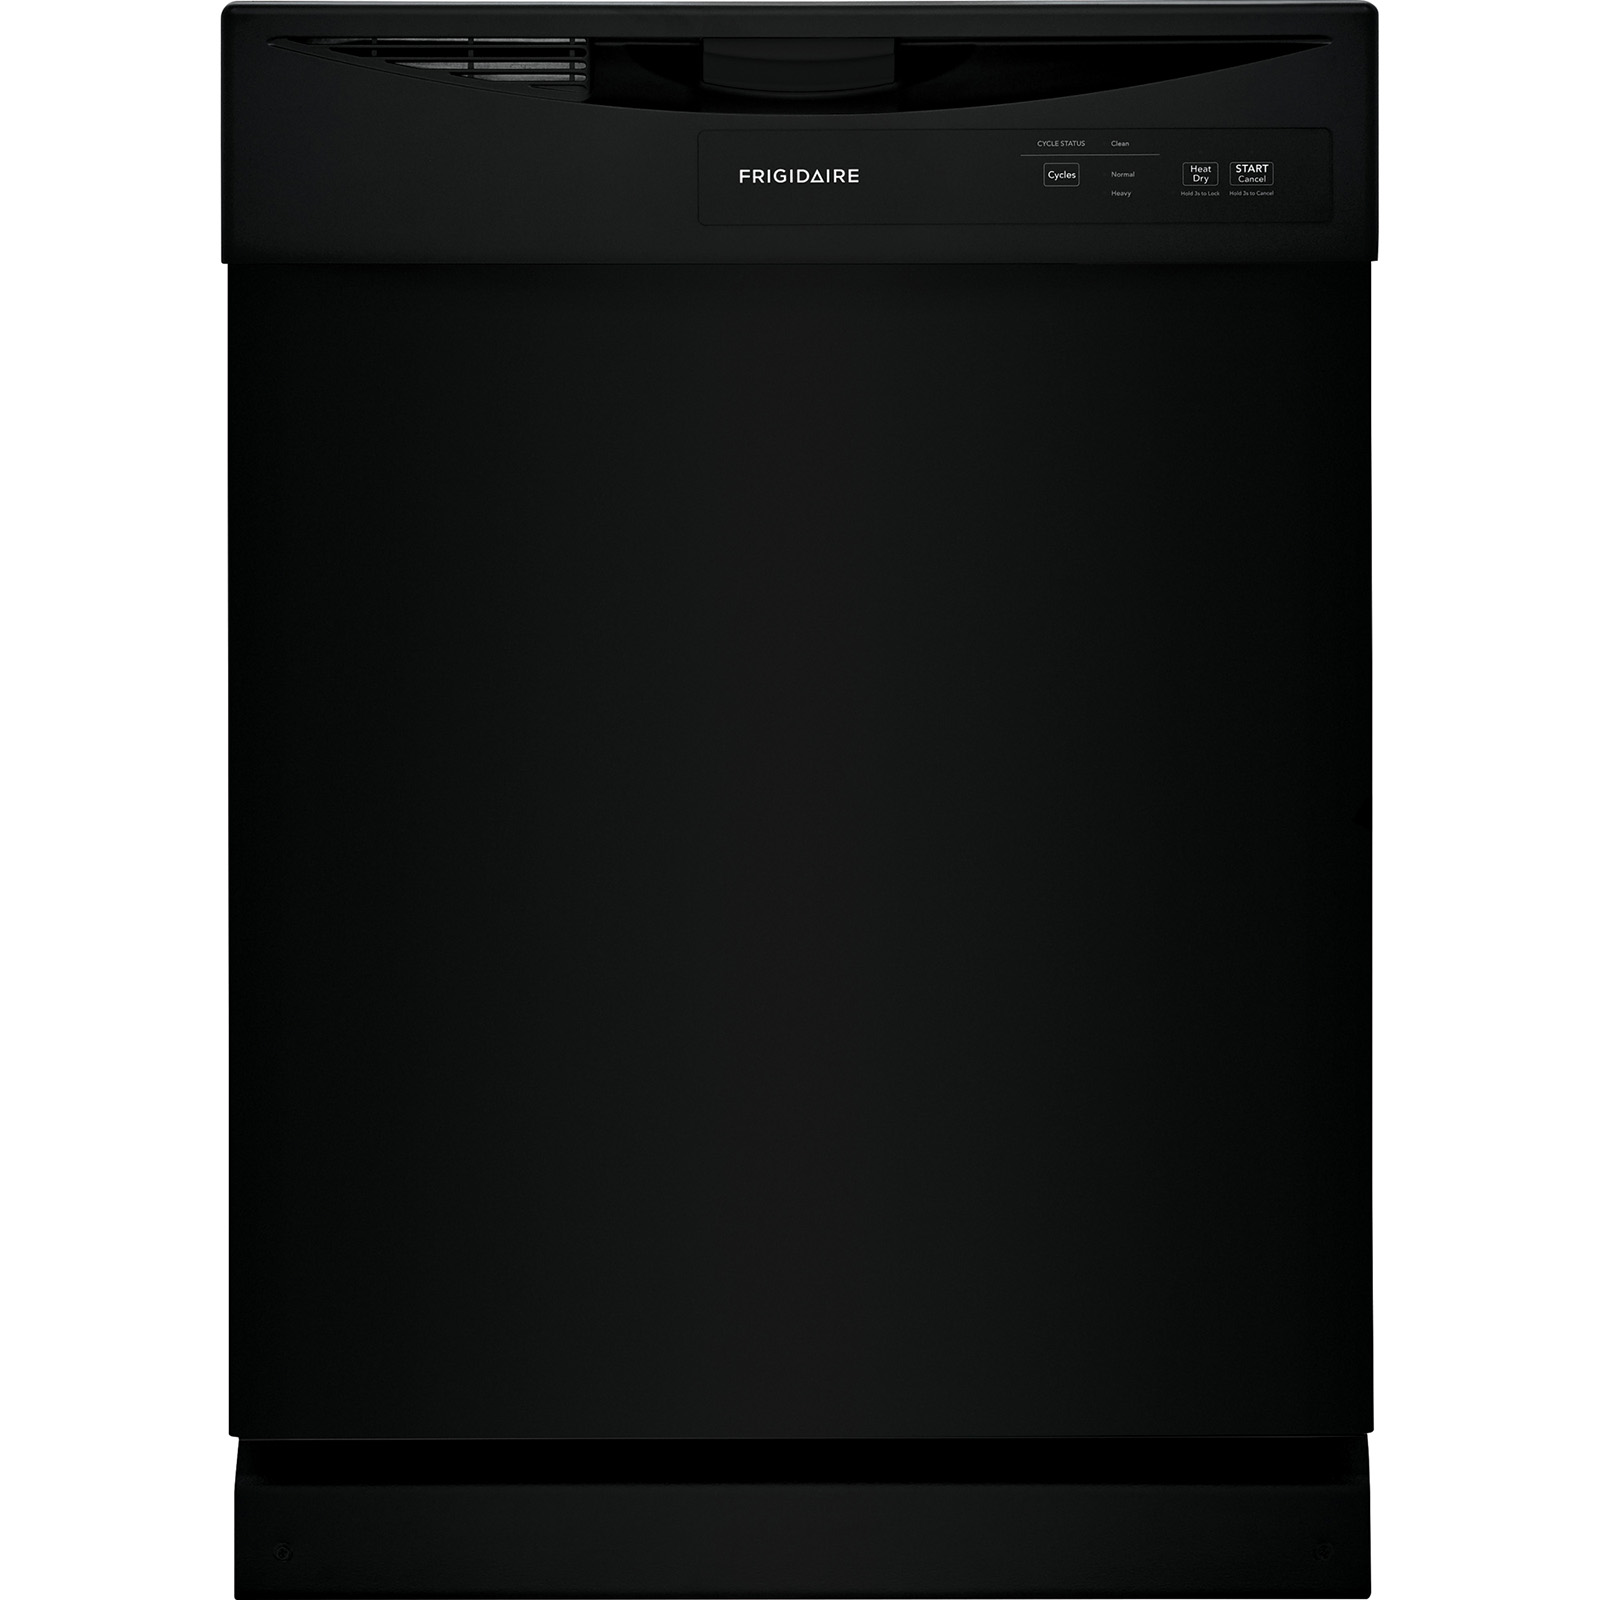 Frigidaire FDPC4221AB 24'' Built-In Dishwasher with 5-Level Wash System &#8211; Black